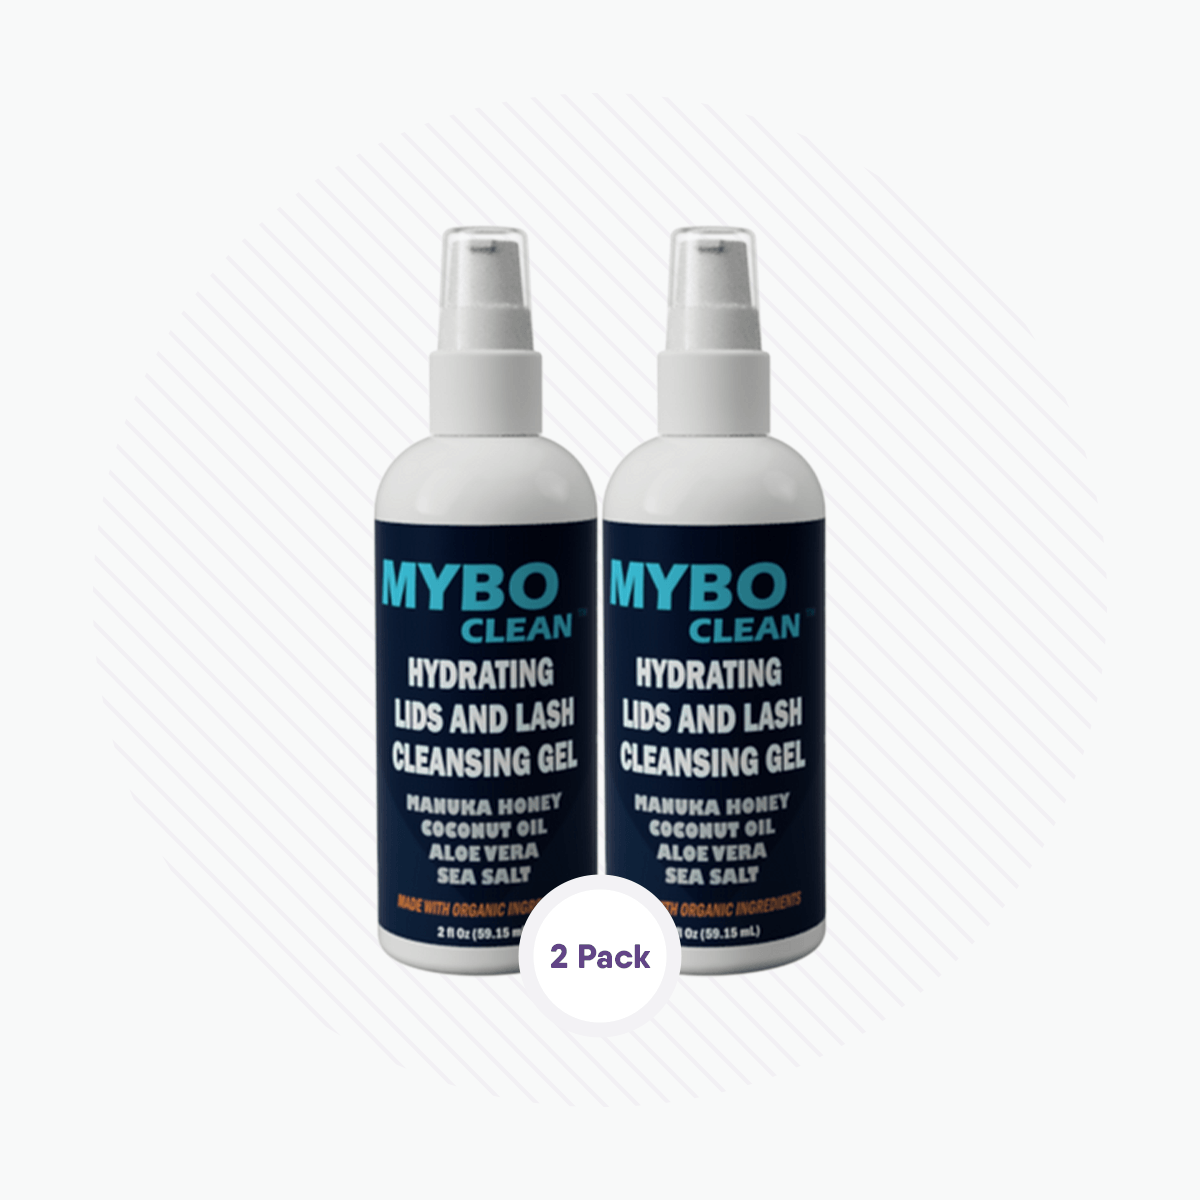 MyboClean Hydrating Lids and Lash Cleansing Gel (2 pc) - 1 Year Supply - DryEye Rescue Store